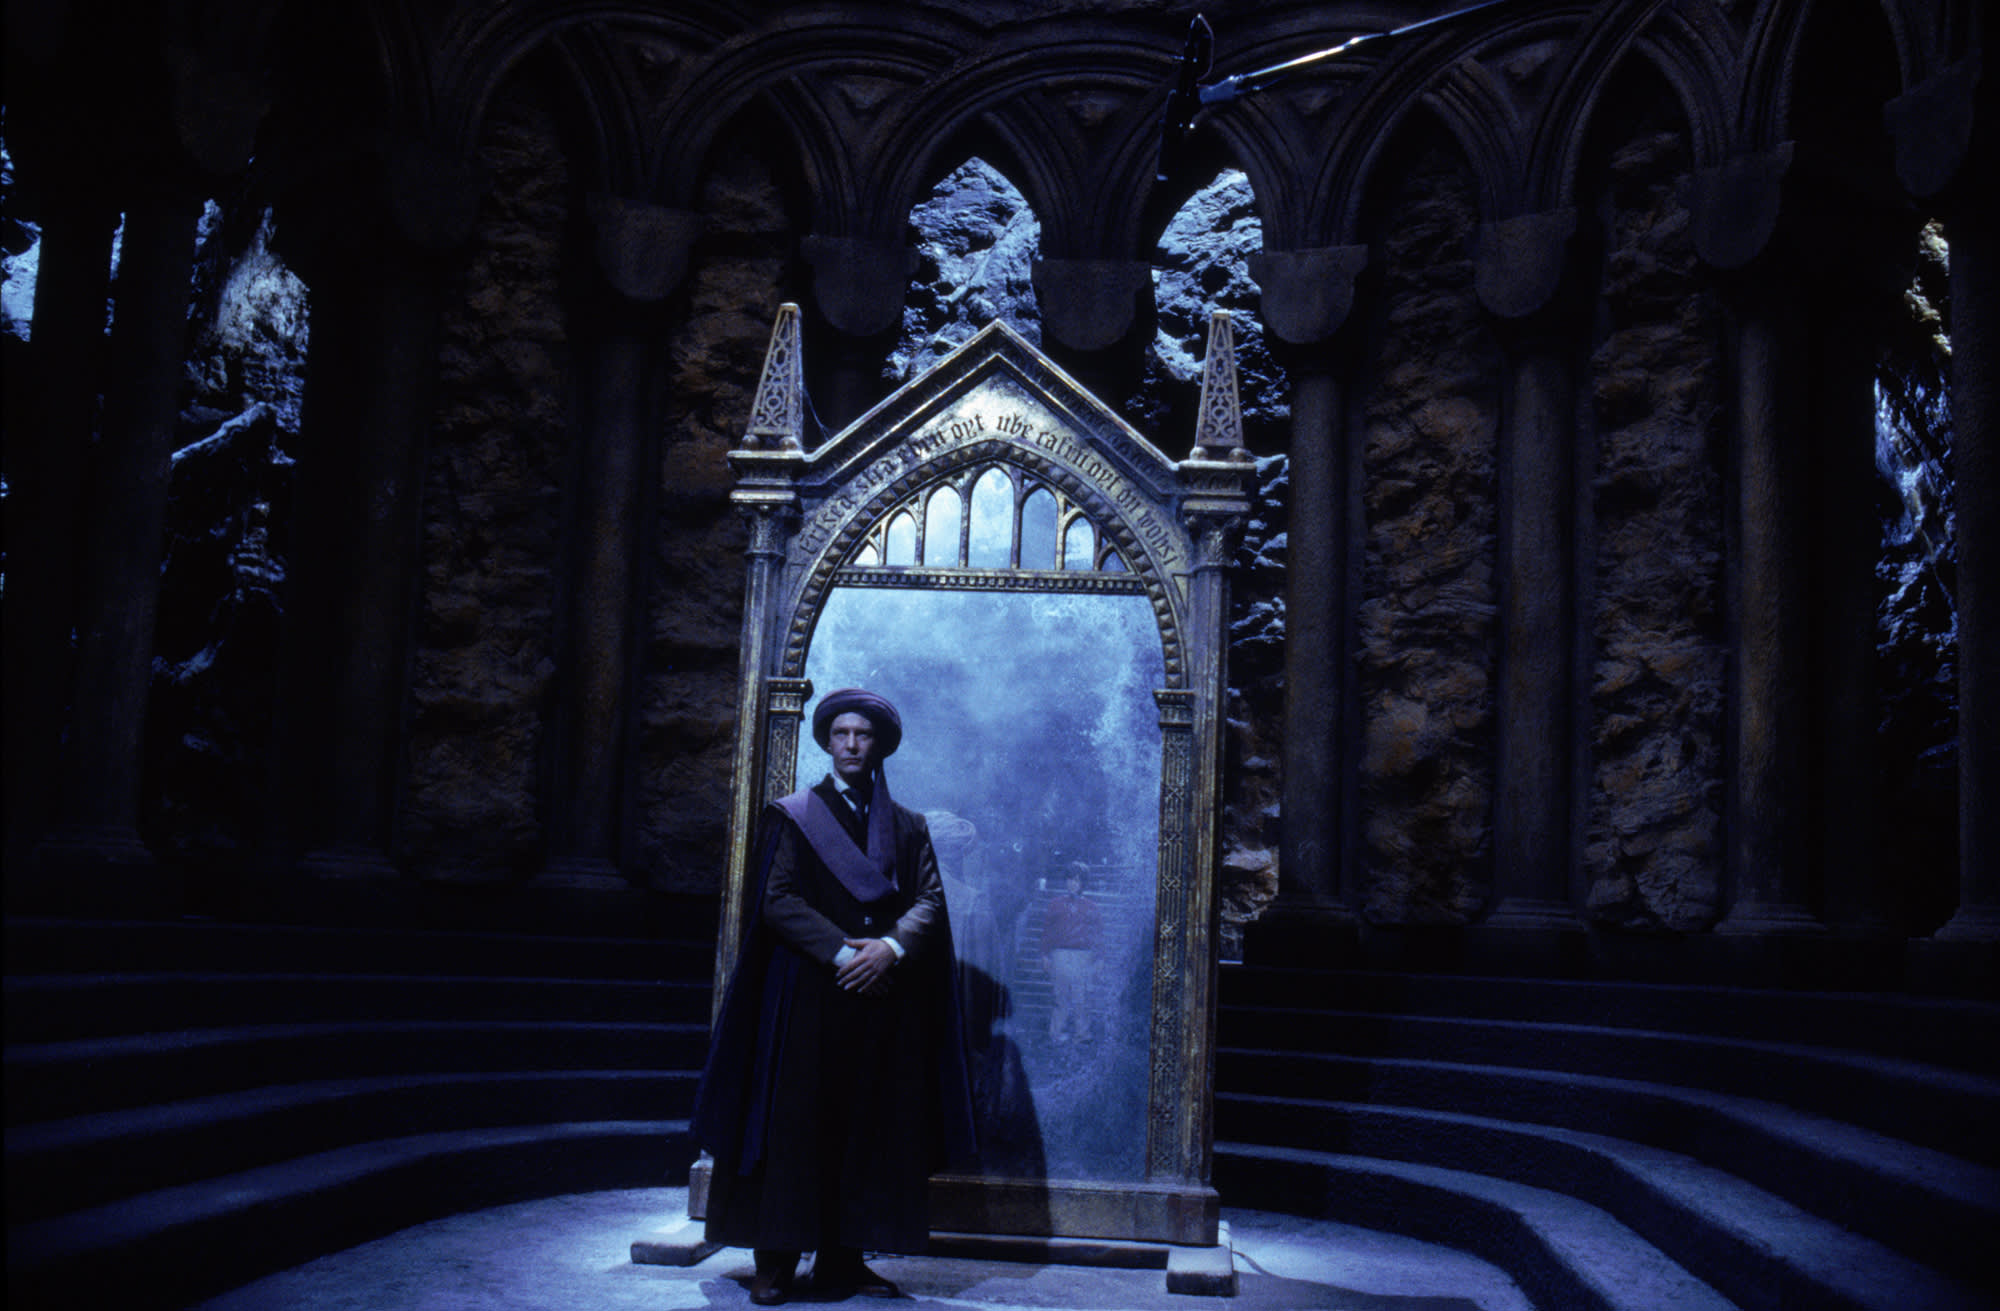 Professor Quirrell is standing with his back to the Mirror of Erised in a stone room.